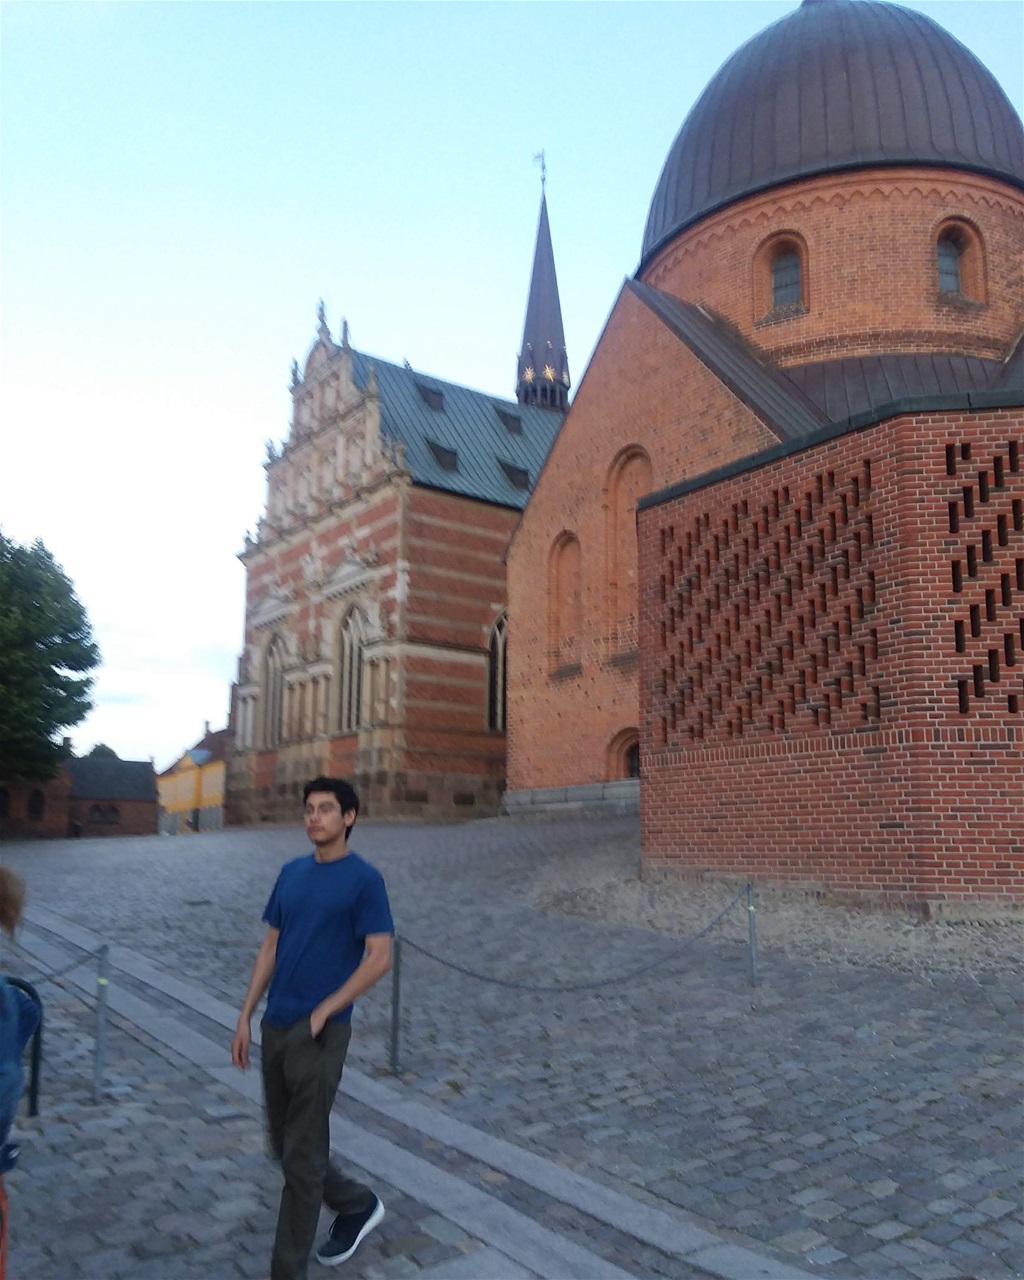 In front of the mausoleum of Roskilde Cathedral with the Yellow Palace (Royal Mansion) further down the very large square.